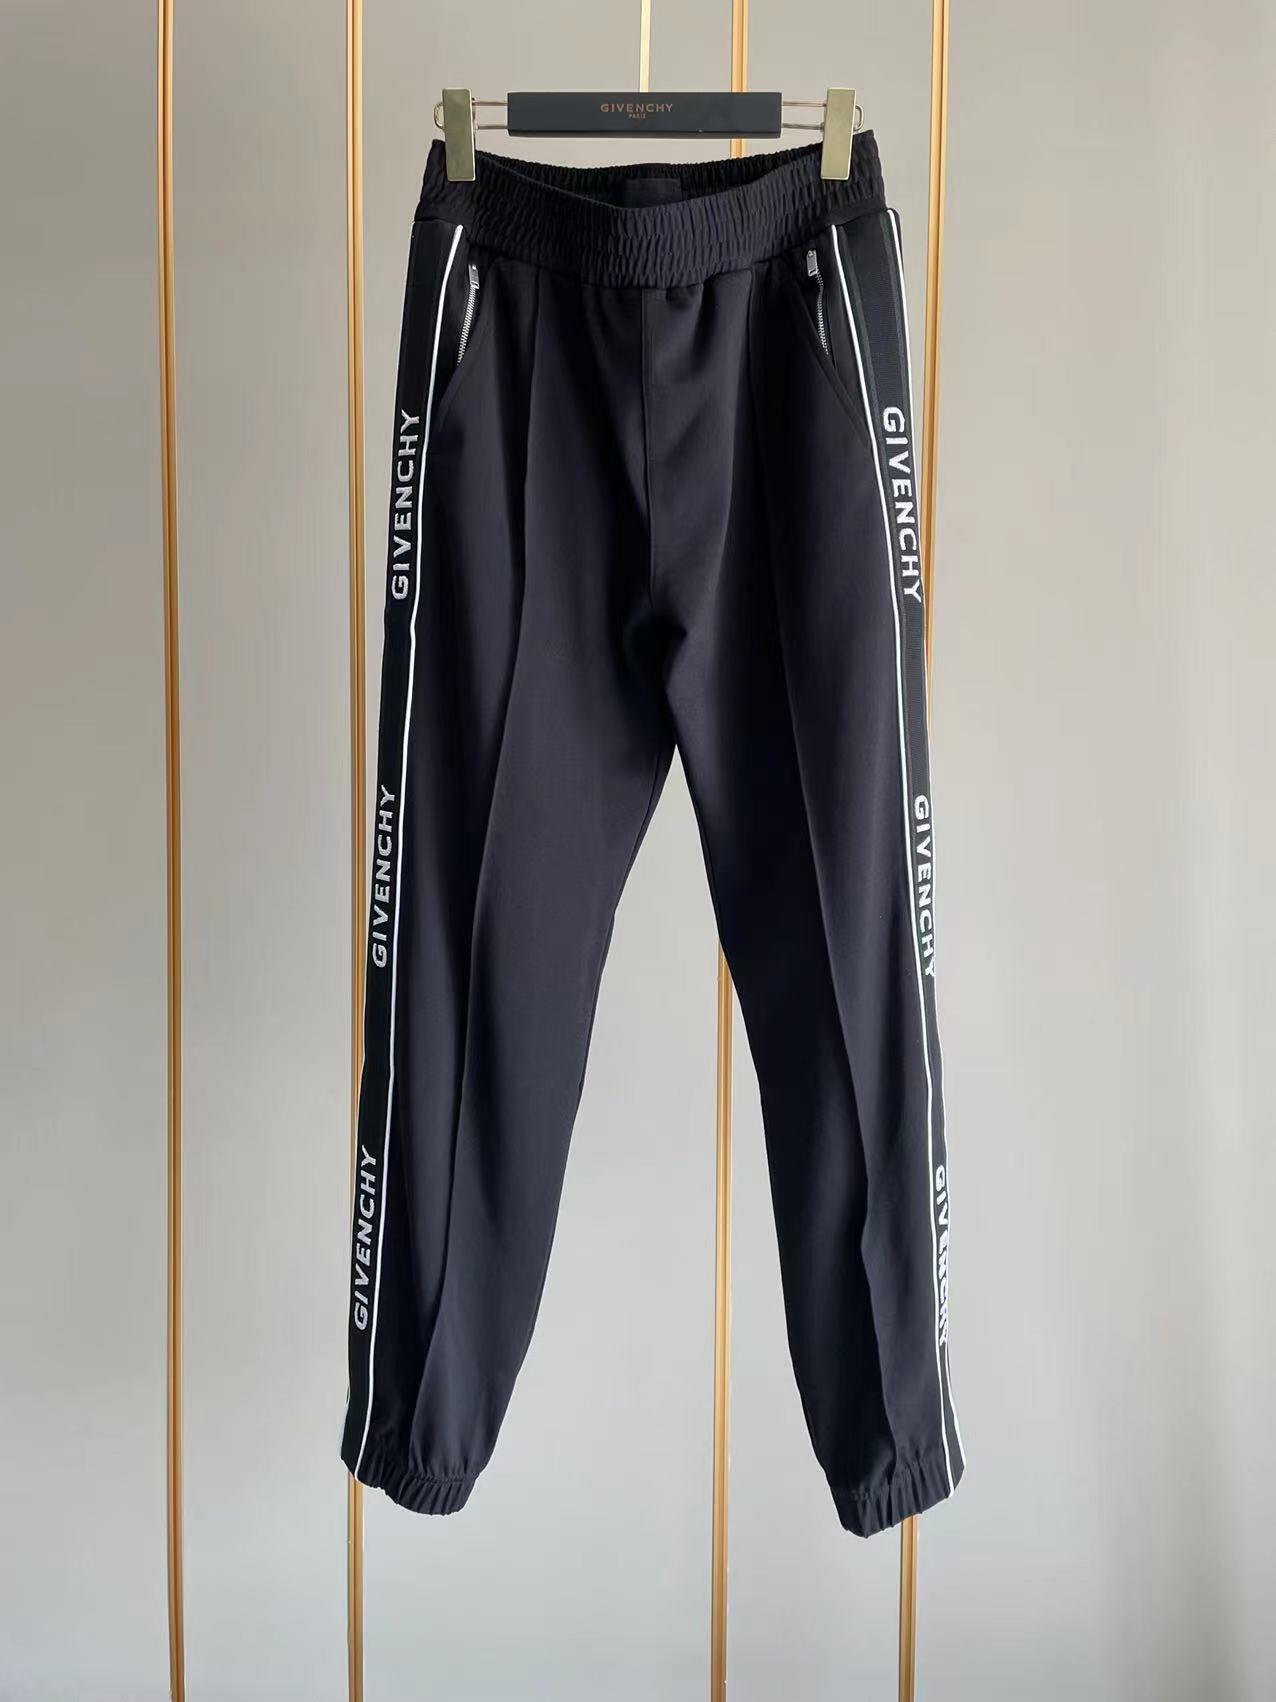 slim-fit-jogger-pants-in-jersey-with-givenchy-bands-6628_16845014232-1000